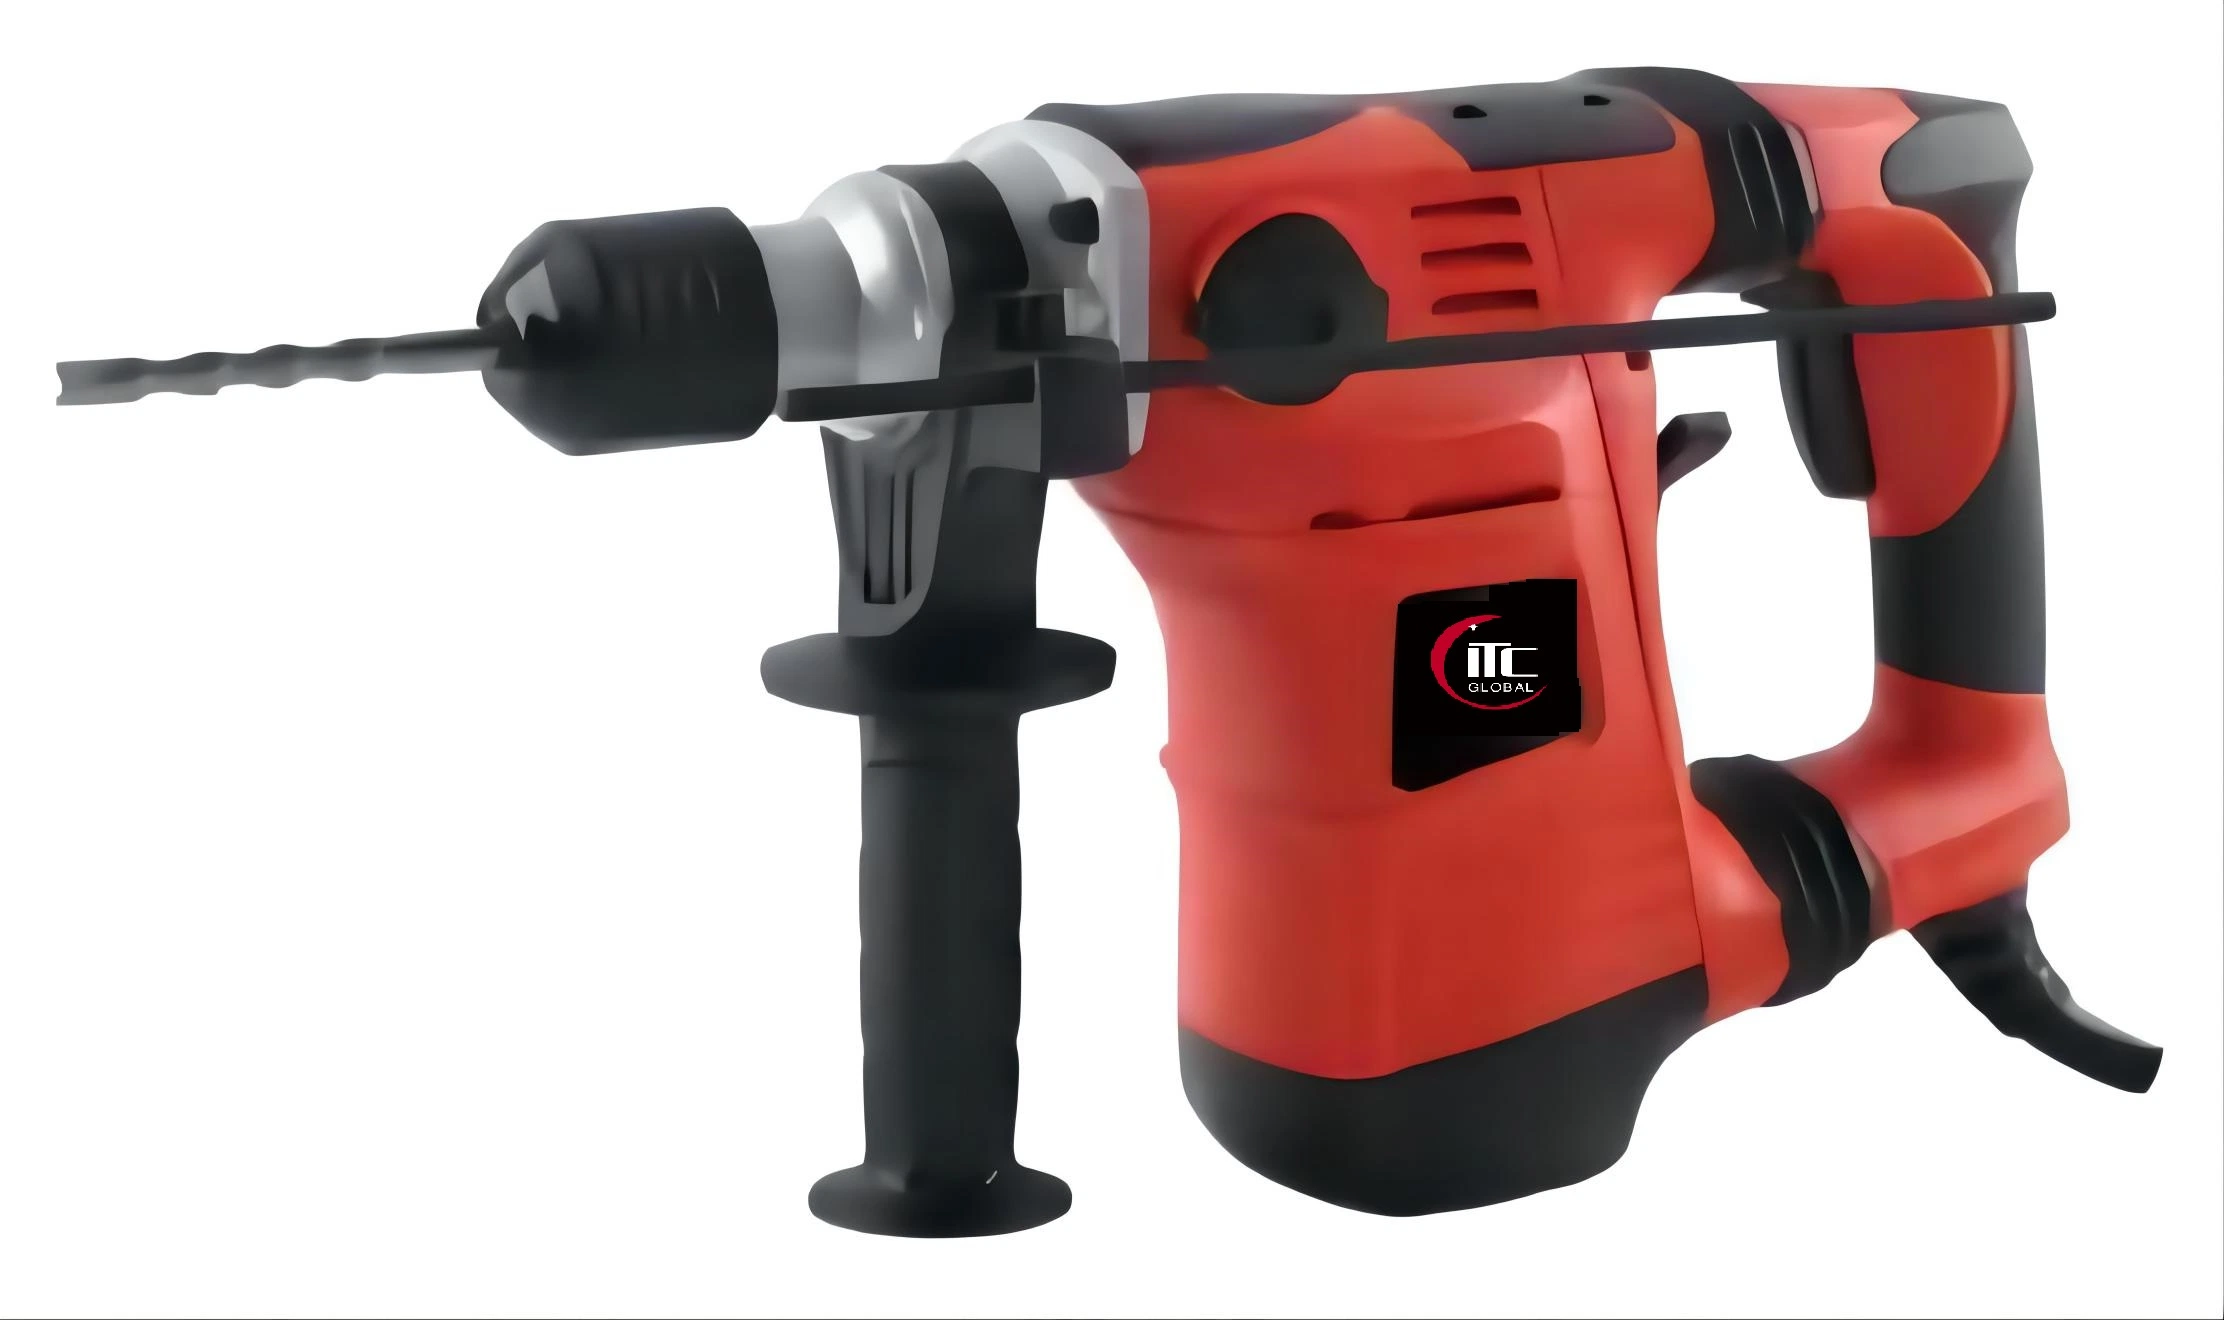 2022 New-Professional Design-1500W SDS Plus-Electric Rotary Hammer Drill/Constructions-Drilling Machine-Power Tools